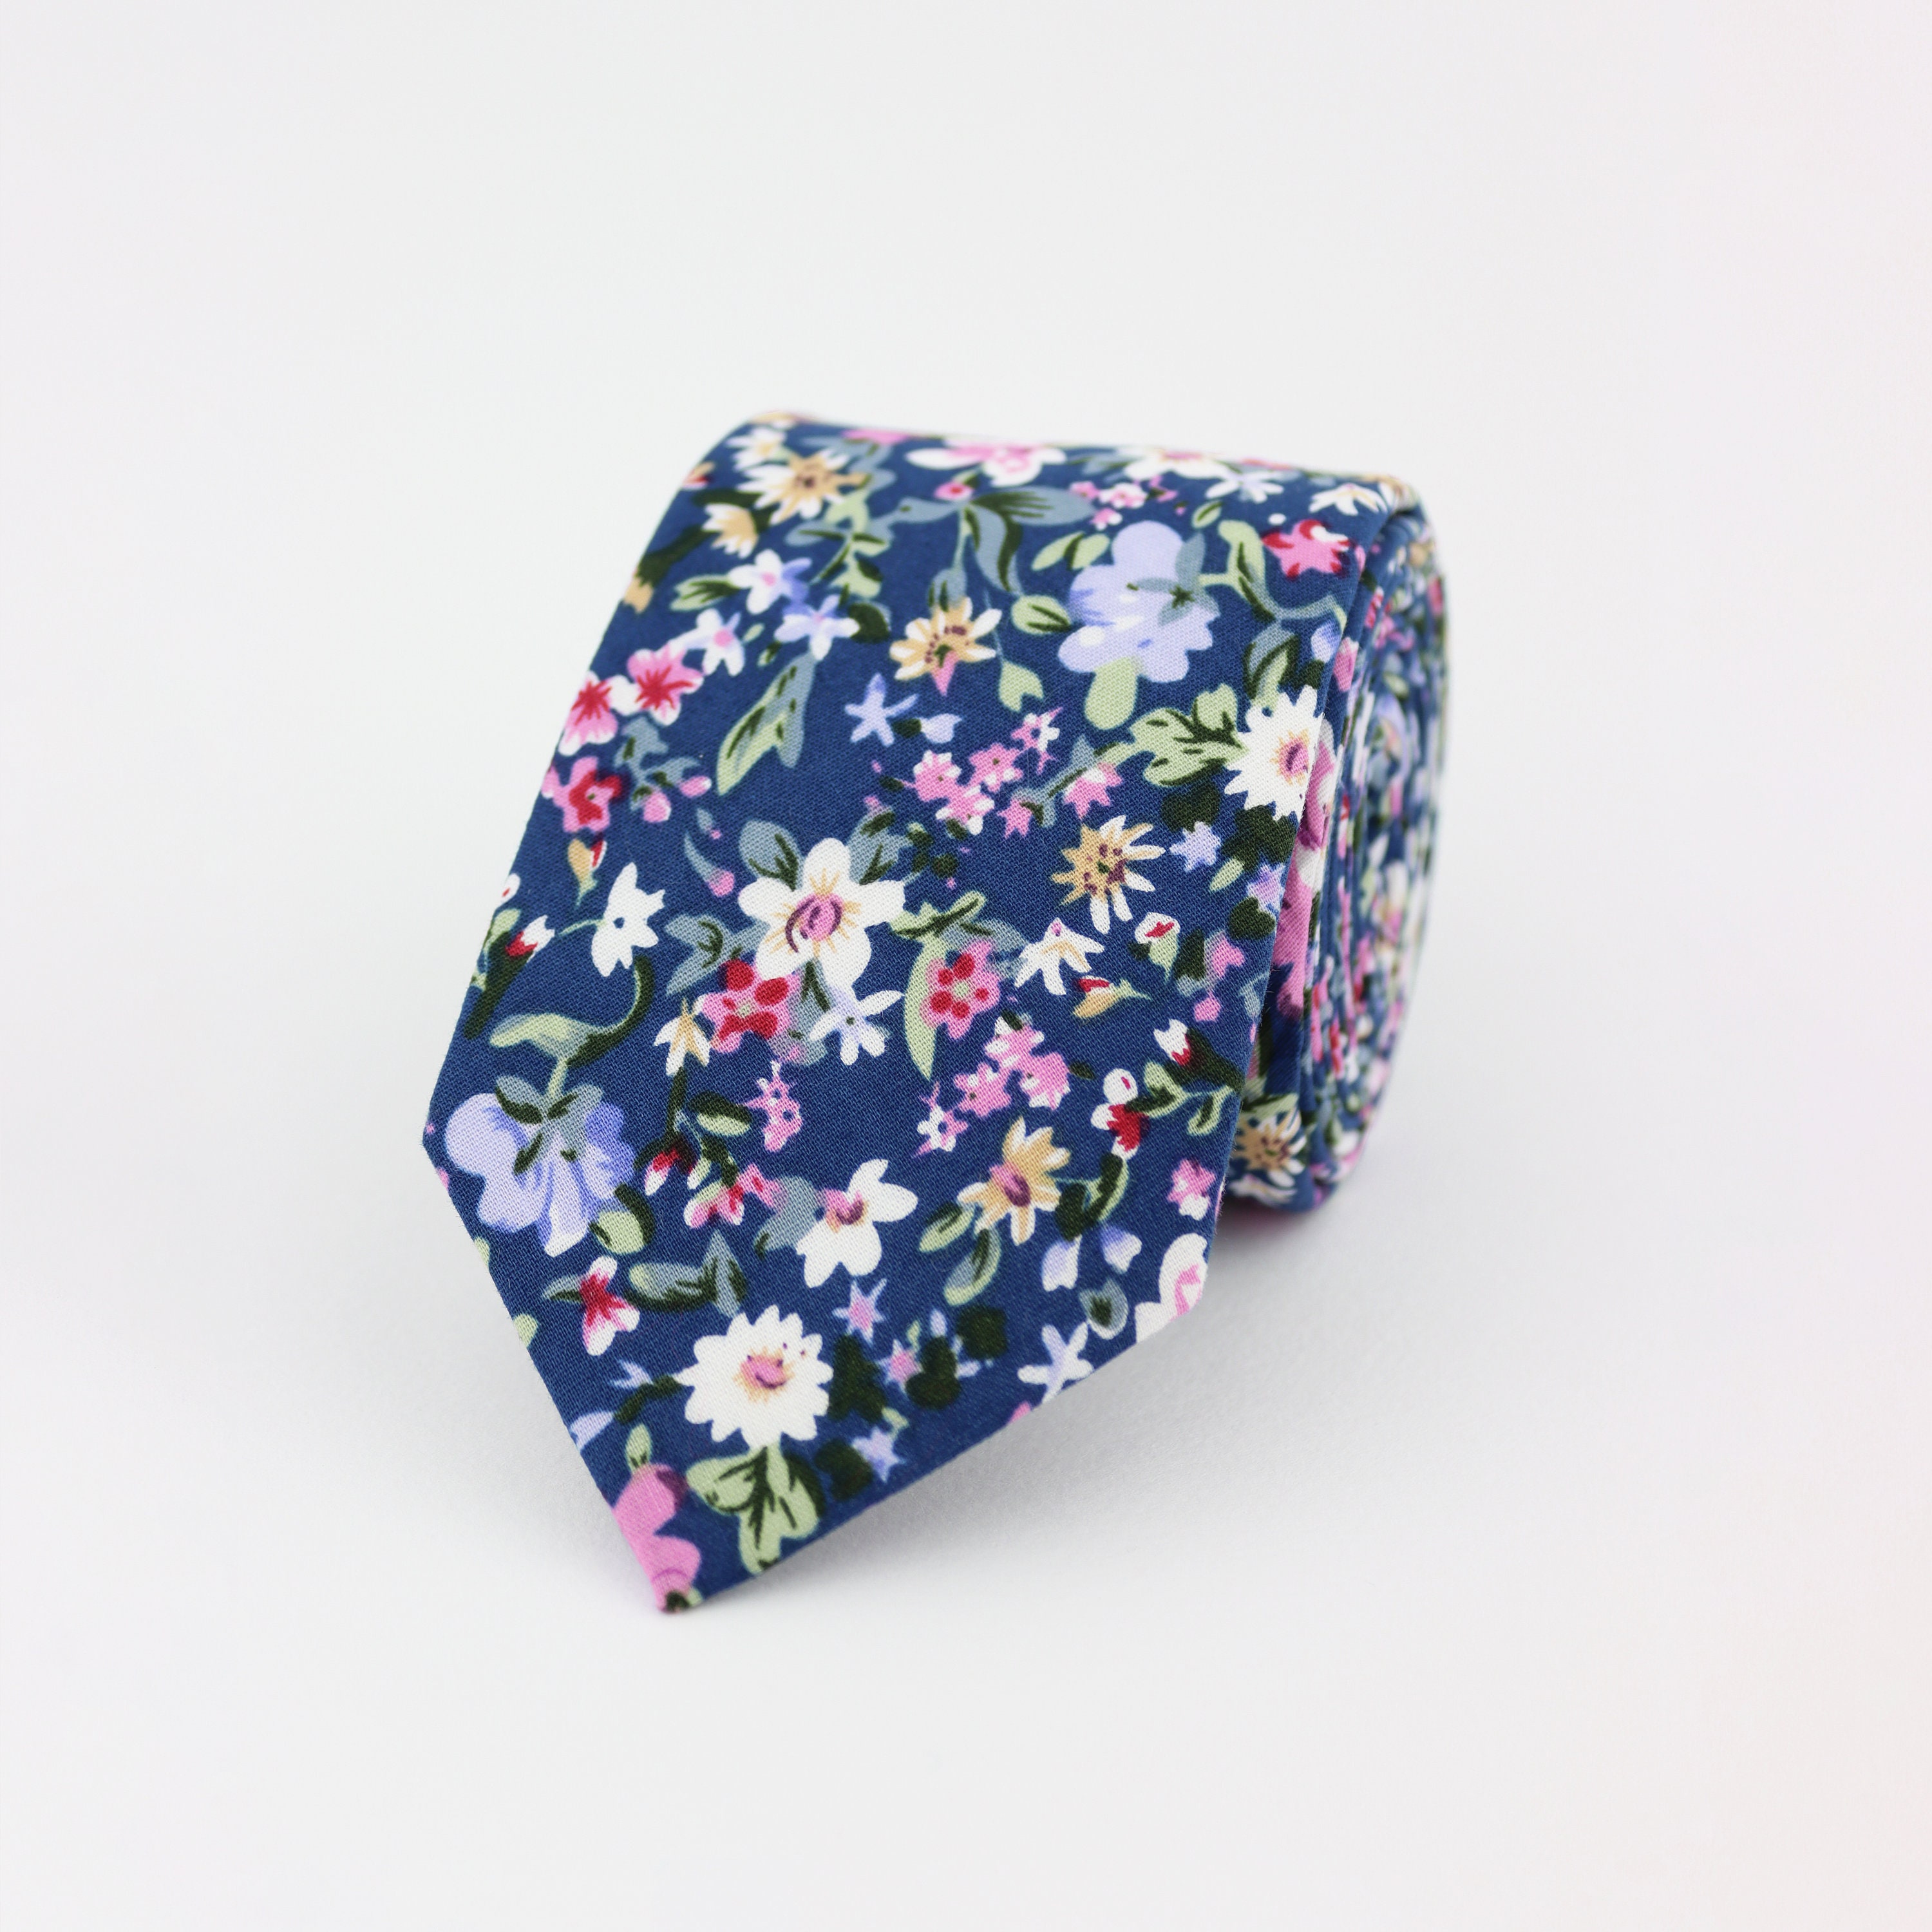 Cotton Floral Tie Handmade Blue and Pink Flower Tie - Etsy UK